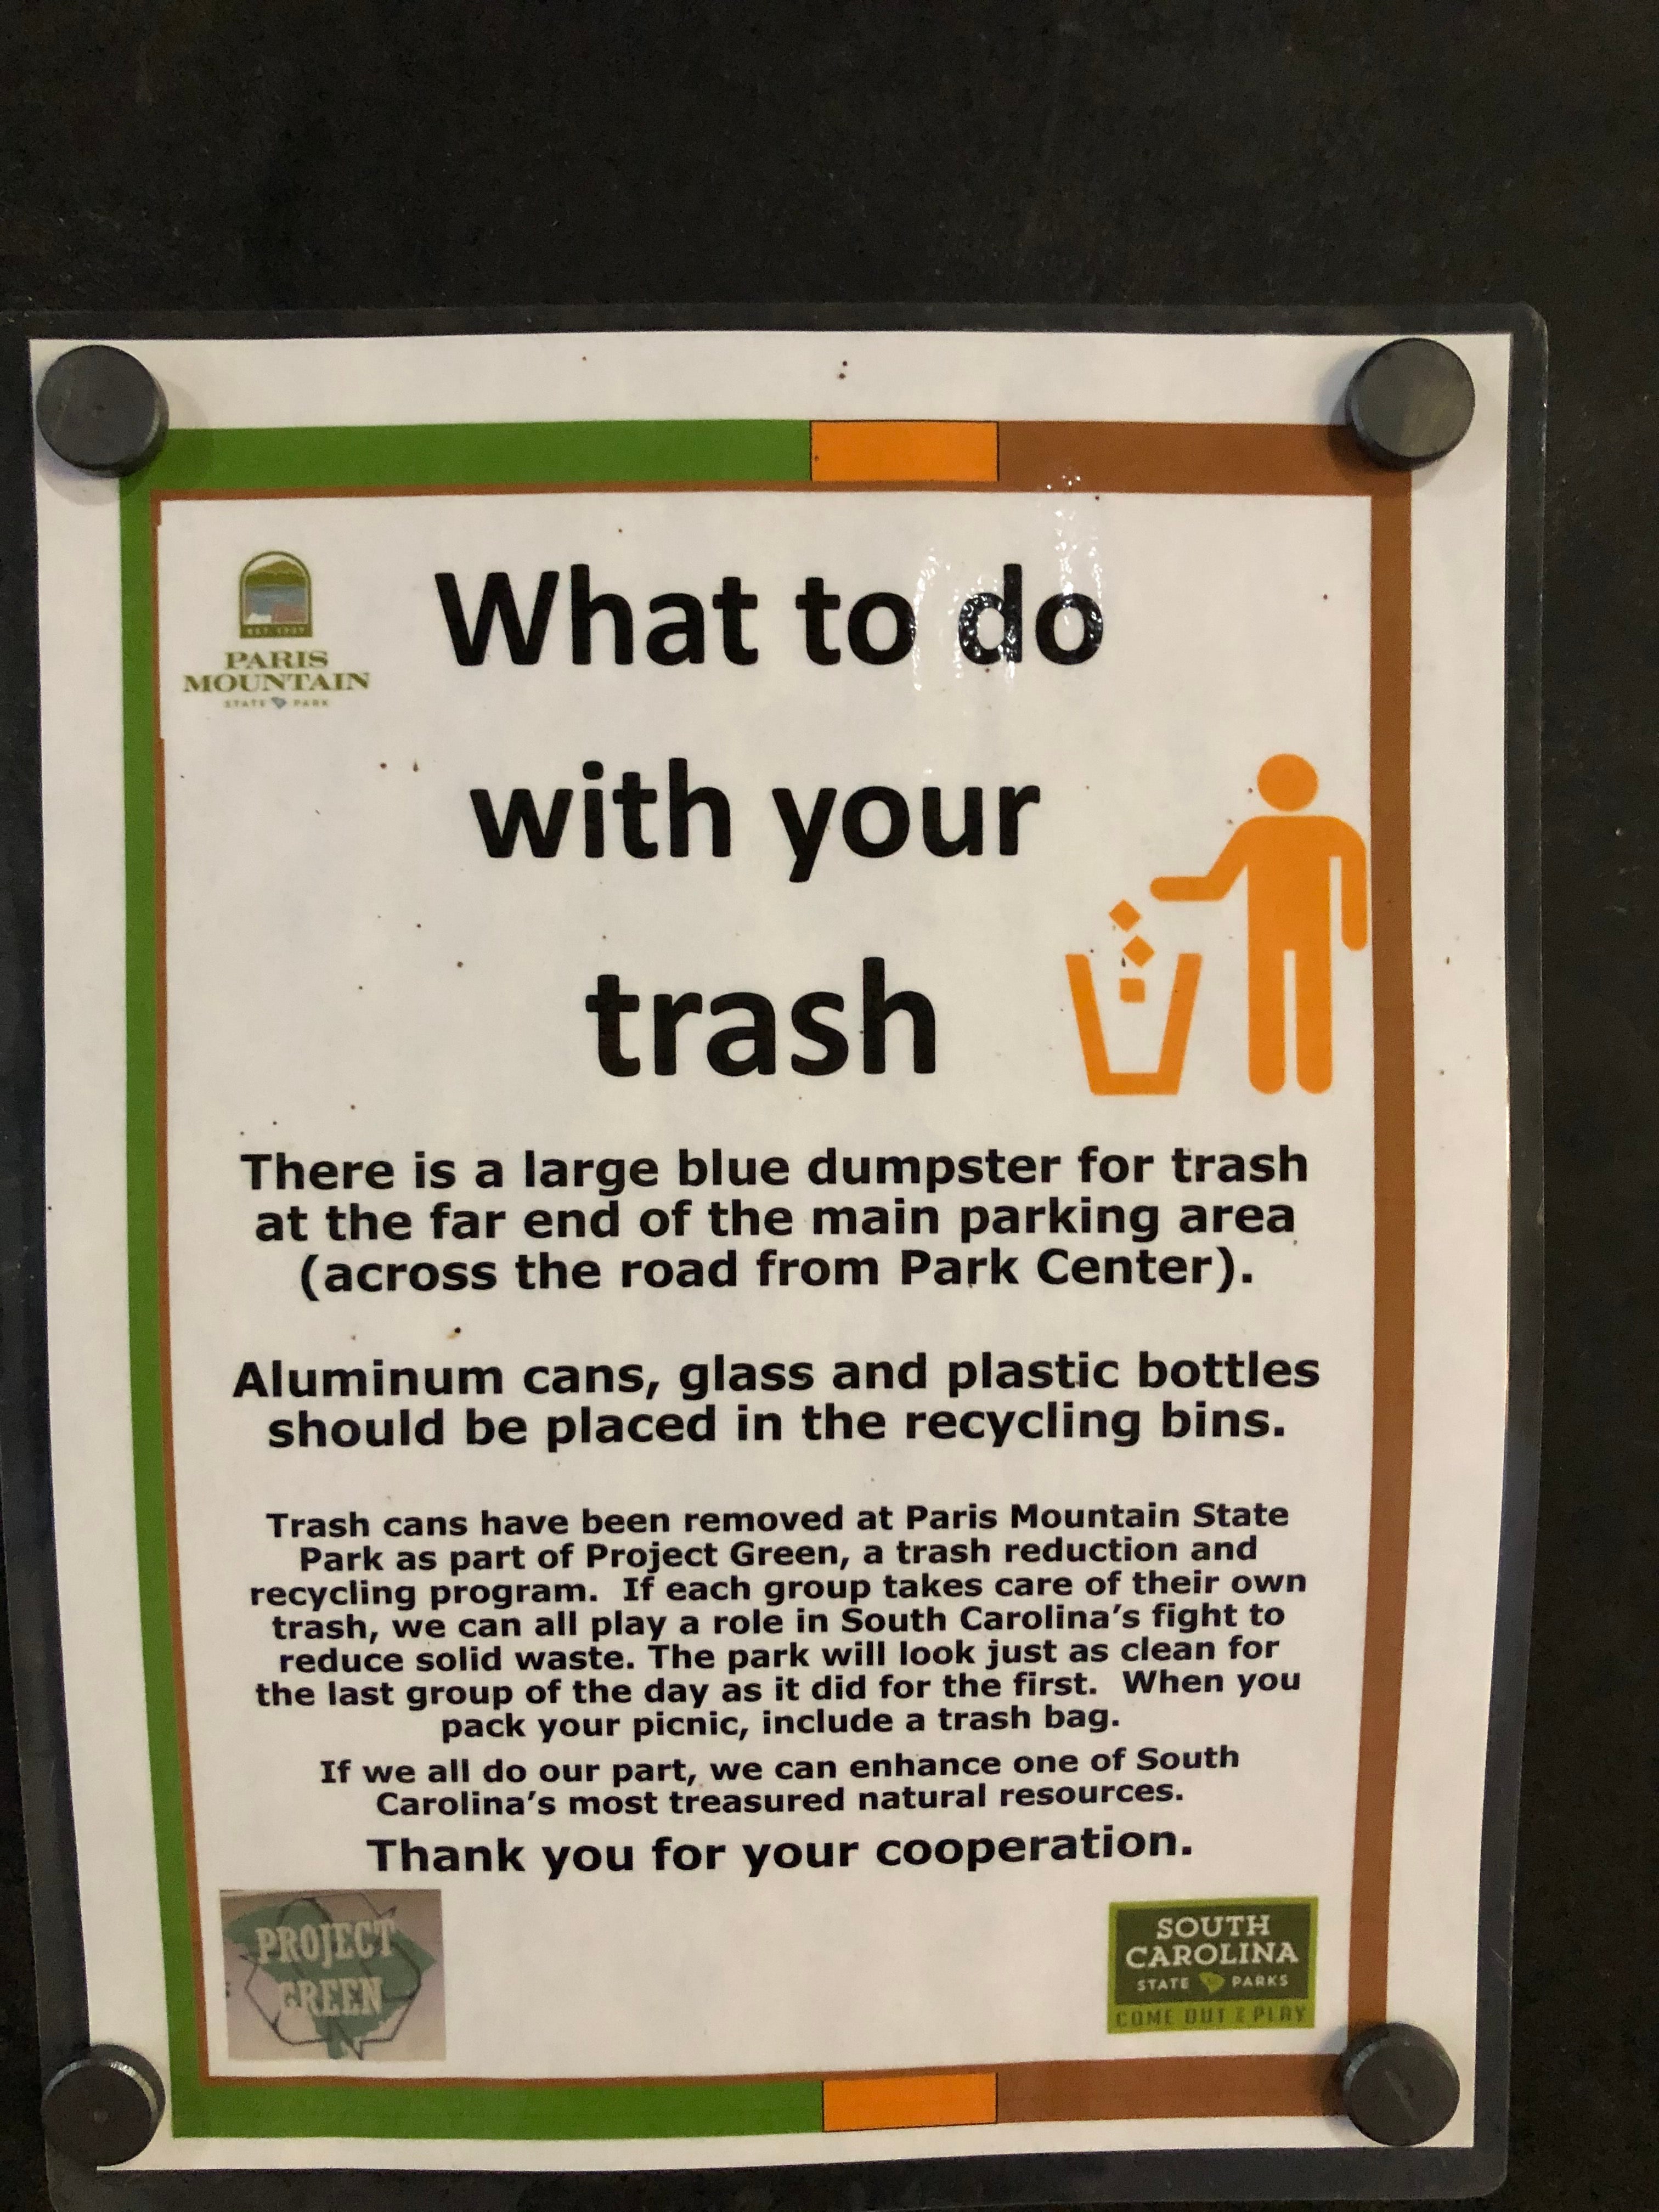 While this is a nice thought, it was a LONG distance to the only dumpster in the park and you are asked to bring your trash to it daily